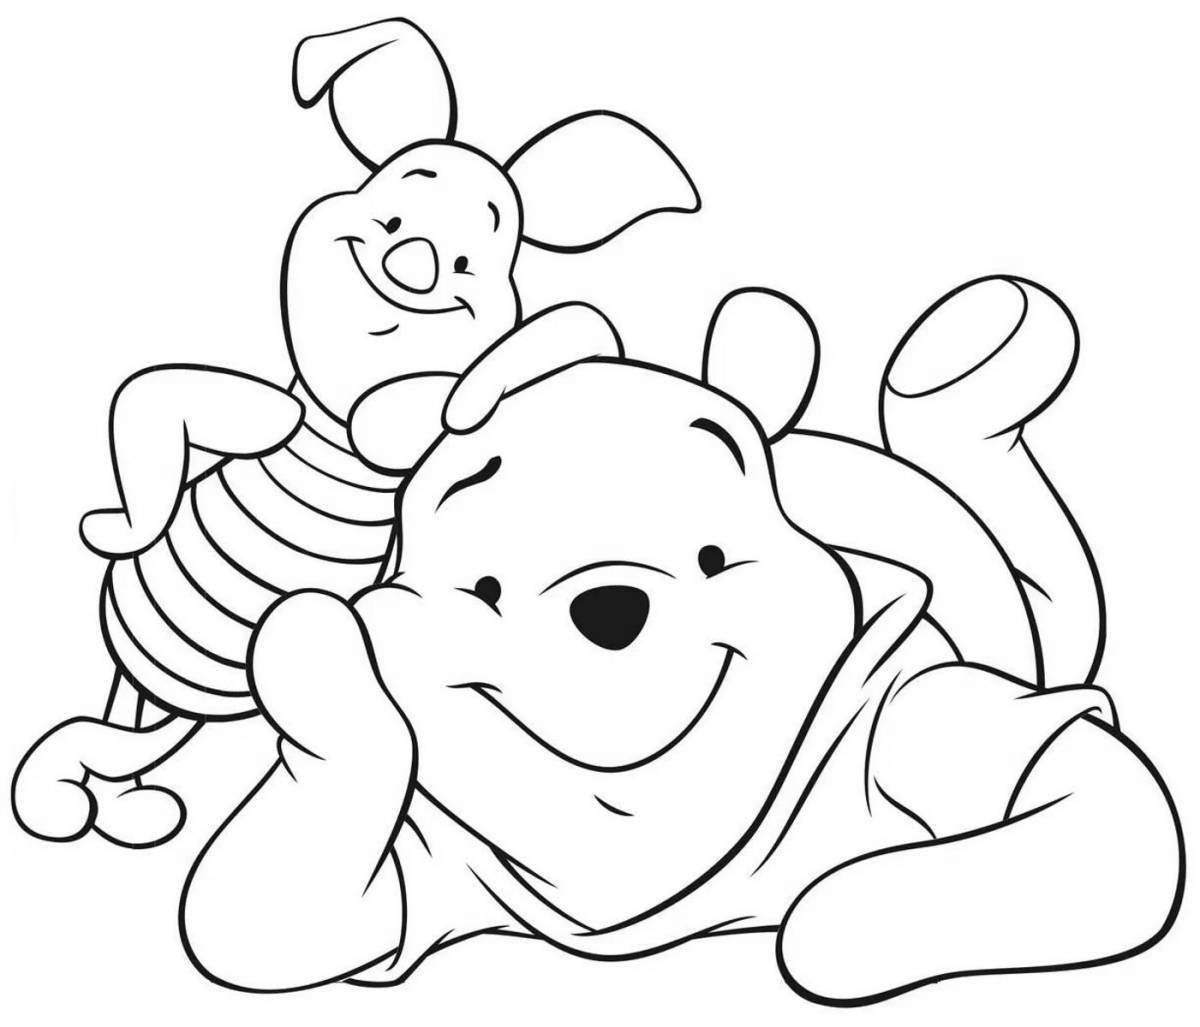 Colorful Winnie the Pooh and his friends coloring book